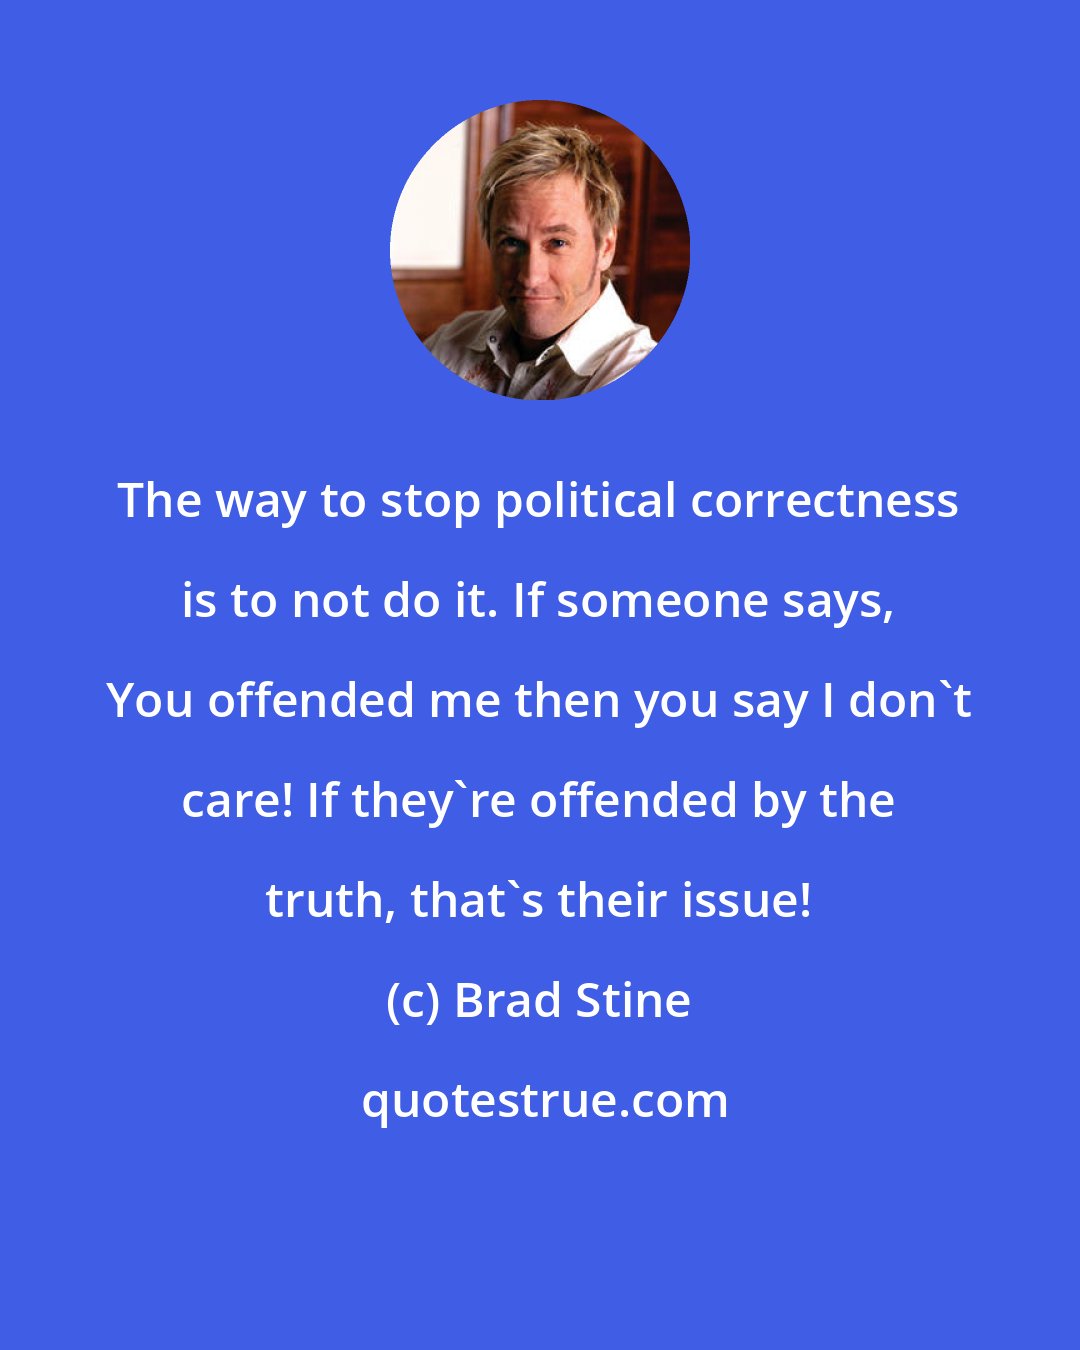 Brad Stine: The way to stop political correctness is to not do it. If someone says, You offended me then you say I don't care! If they're offended by the truth, that's their issue!